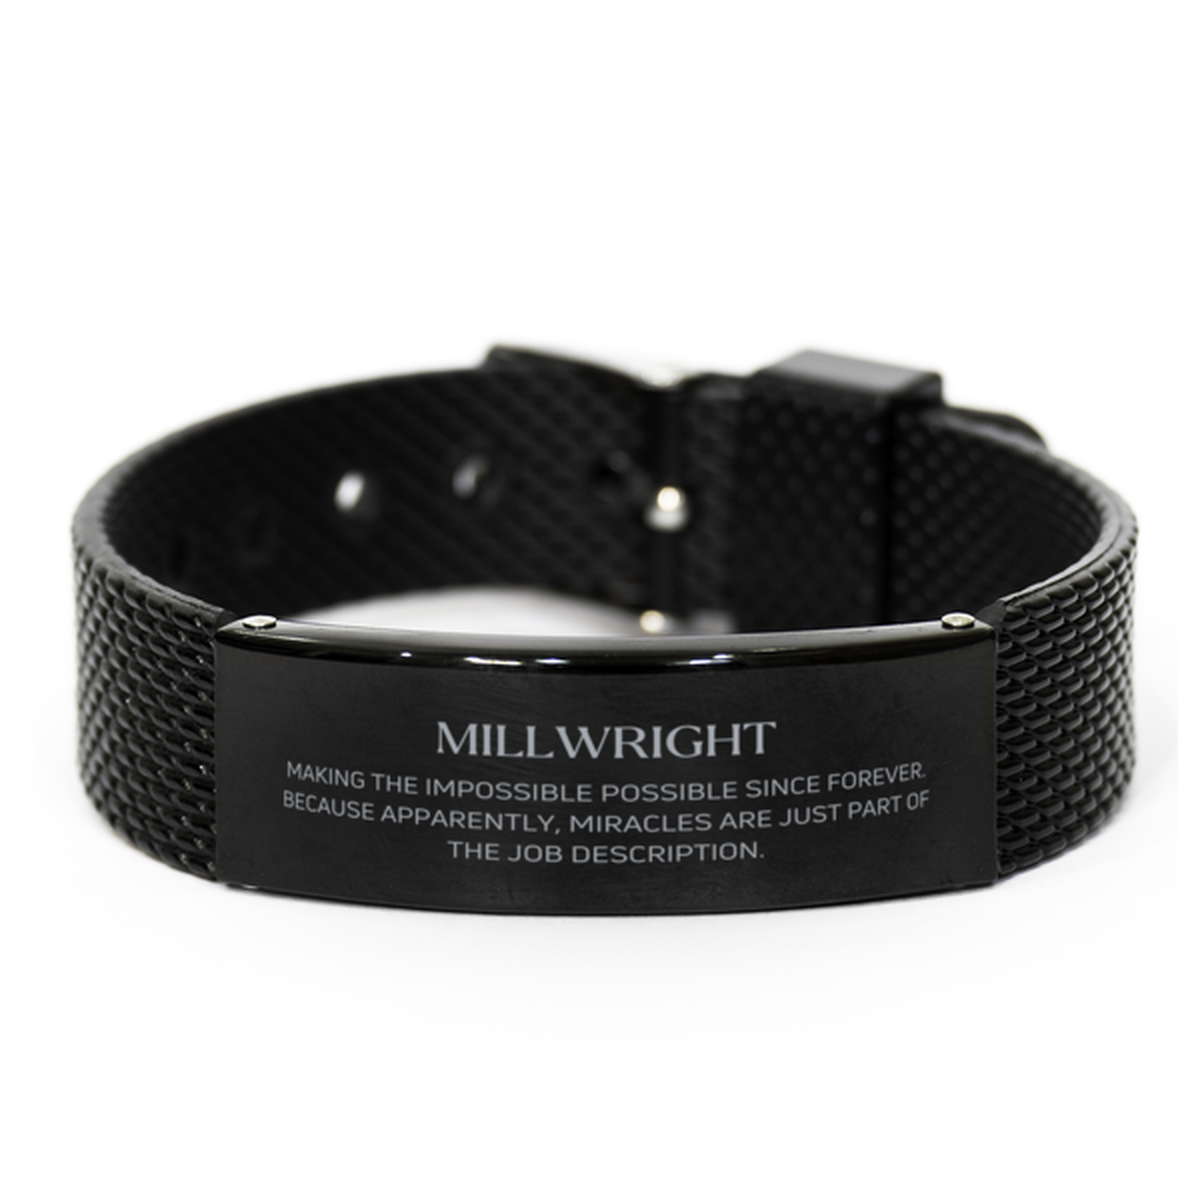 Funny Millwright Gifts, Miracles are just part of the job description, Inspirational Birthday Black Shark Mesh Bracelet For Millwright, Men, Women, Coworkers, Friends, Boss